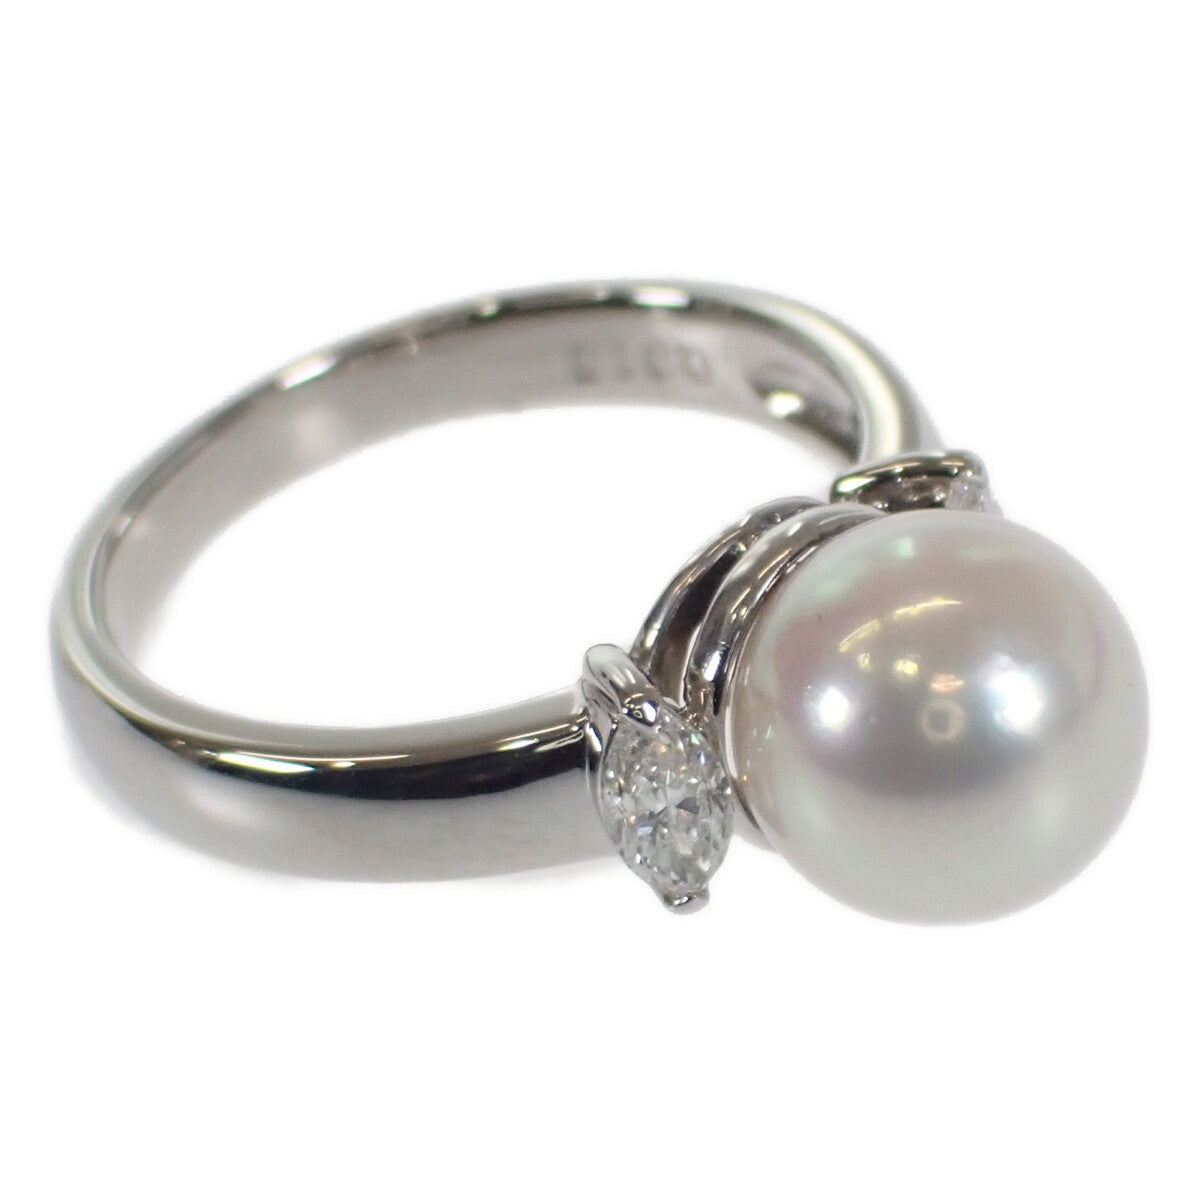 [LuxUness]  Platinum Pt900 Ring with Akoya Pearl 8.9mm and Diamond 0.315ct for Women   in Excellent condition